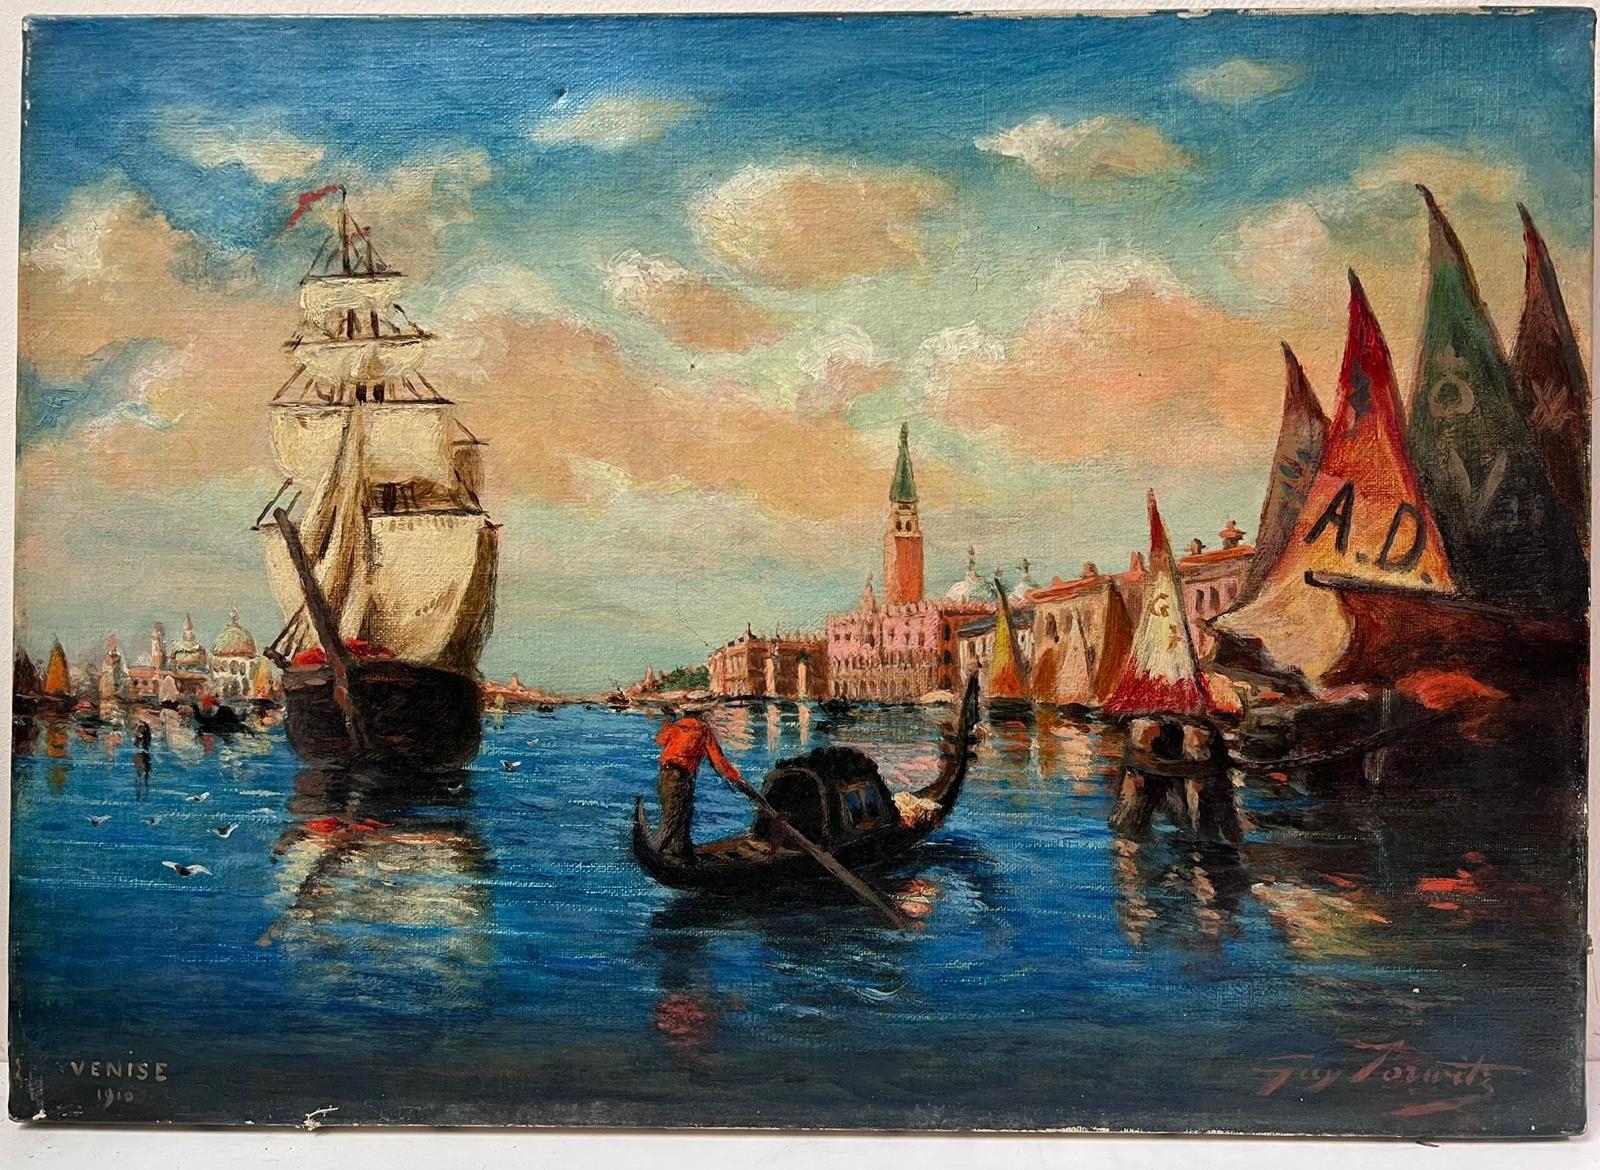 Shipping on the Grand Canal, Venice
signed & dated 1910
oil on canvas, unframed
canvas: 13 x 18 inches
provenance: private collection, Europe
condition: basic good condition though with some punctures and minor damage. 